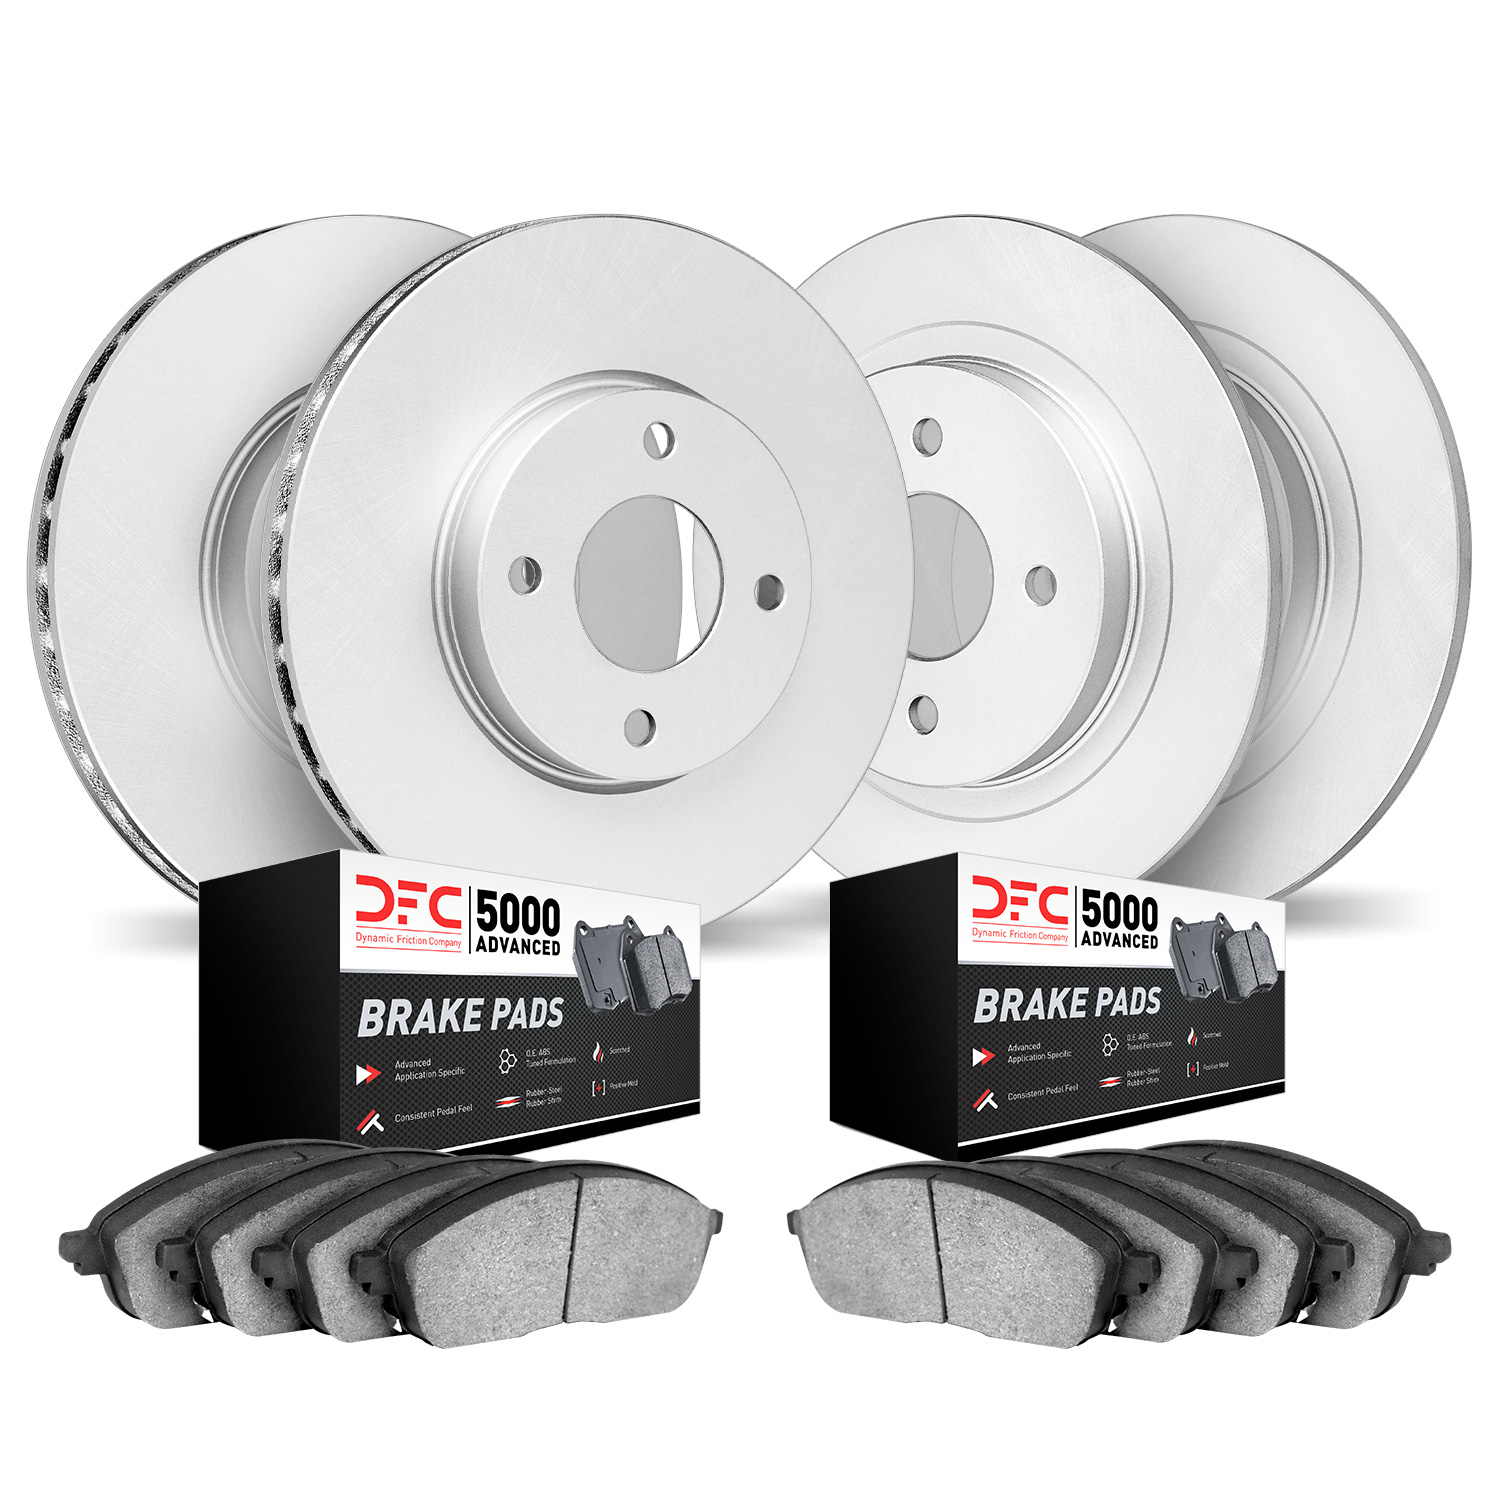 4504-54221 Geospec Brake Rotors w/5000 Advanced Brake Pads Kit, 2014-2019 Ford/Lincoln/Mercury/Mazda, Position: Front and Rear